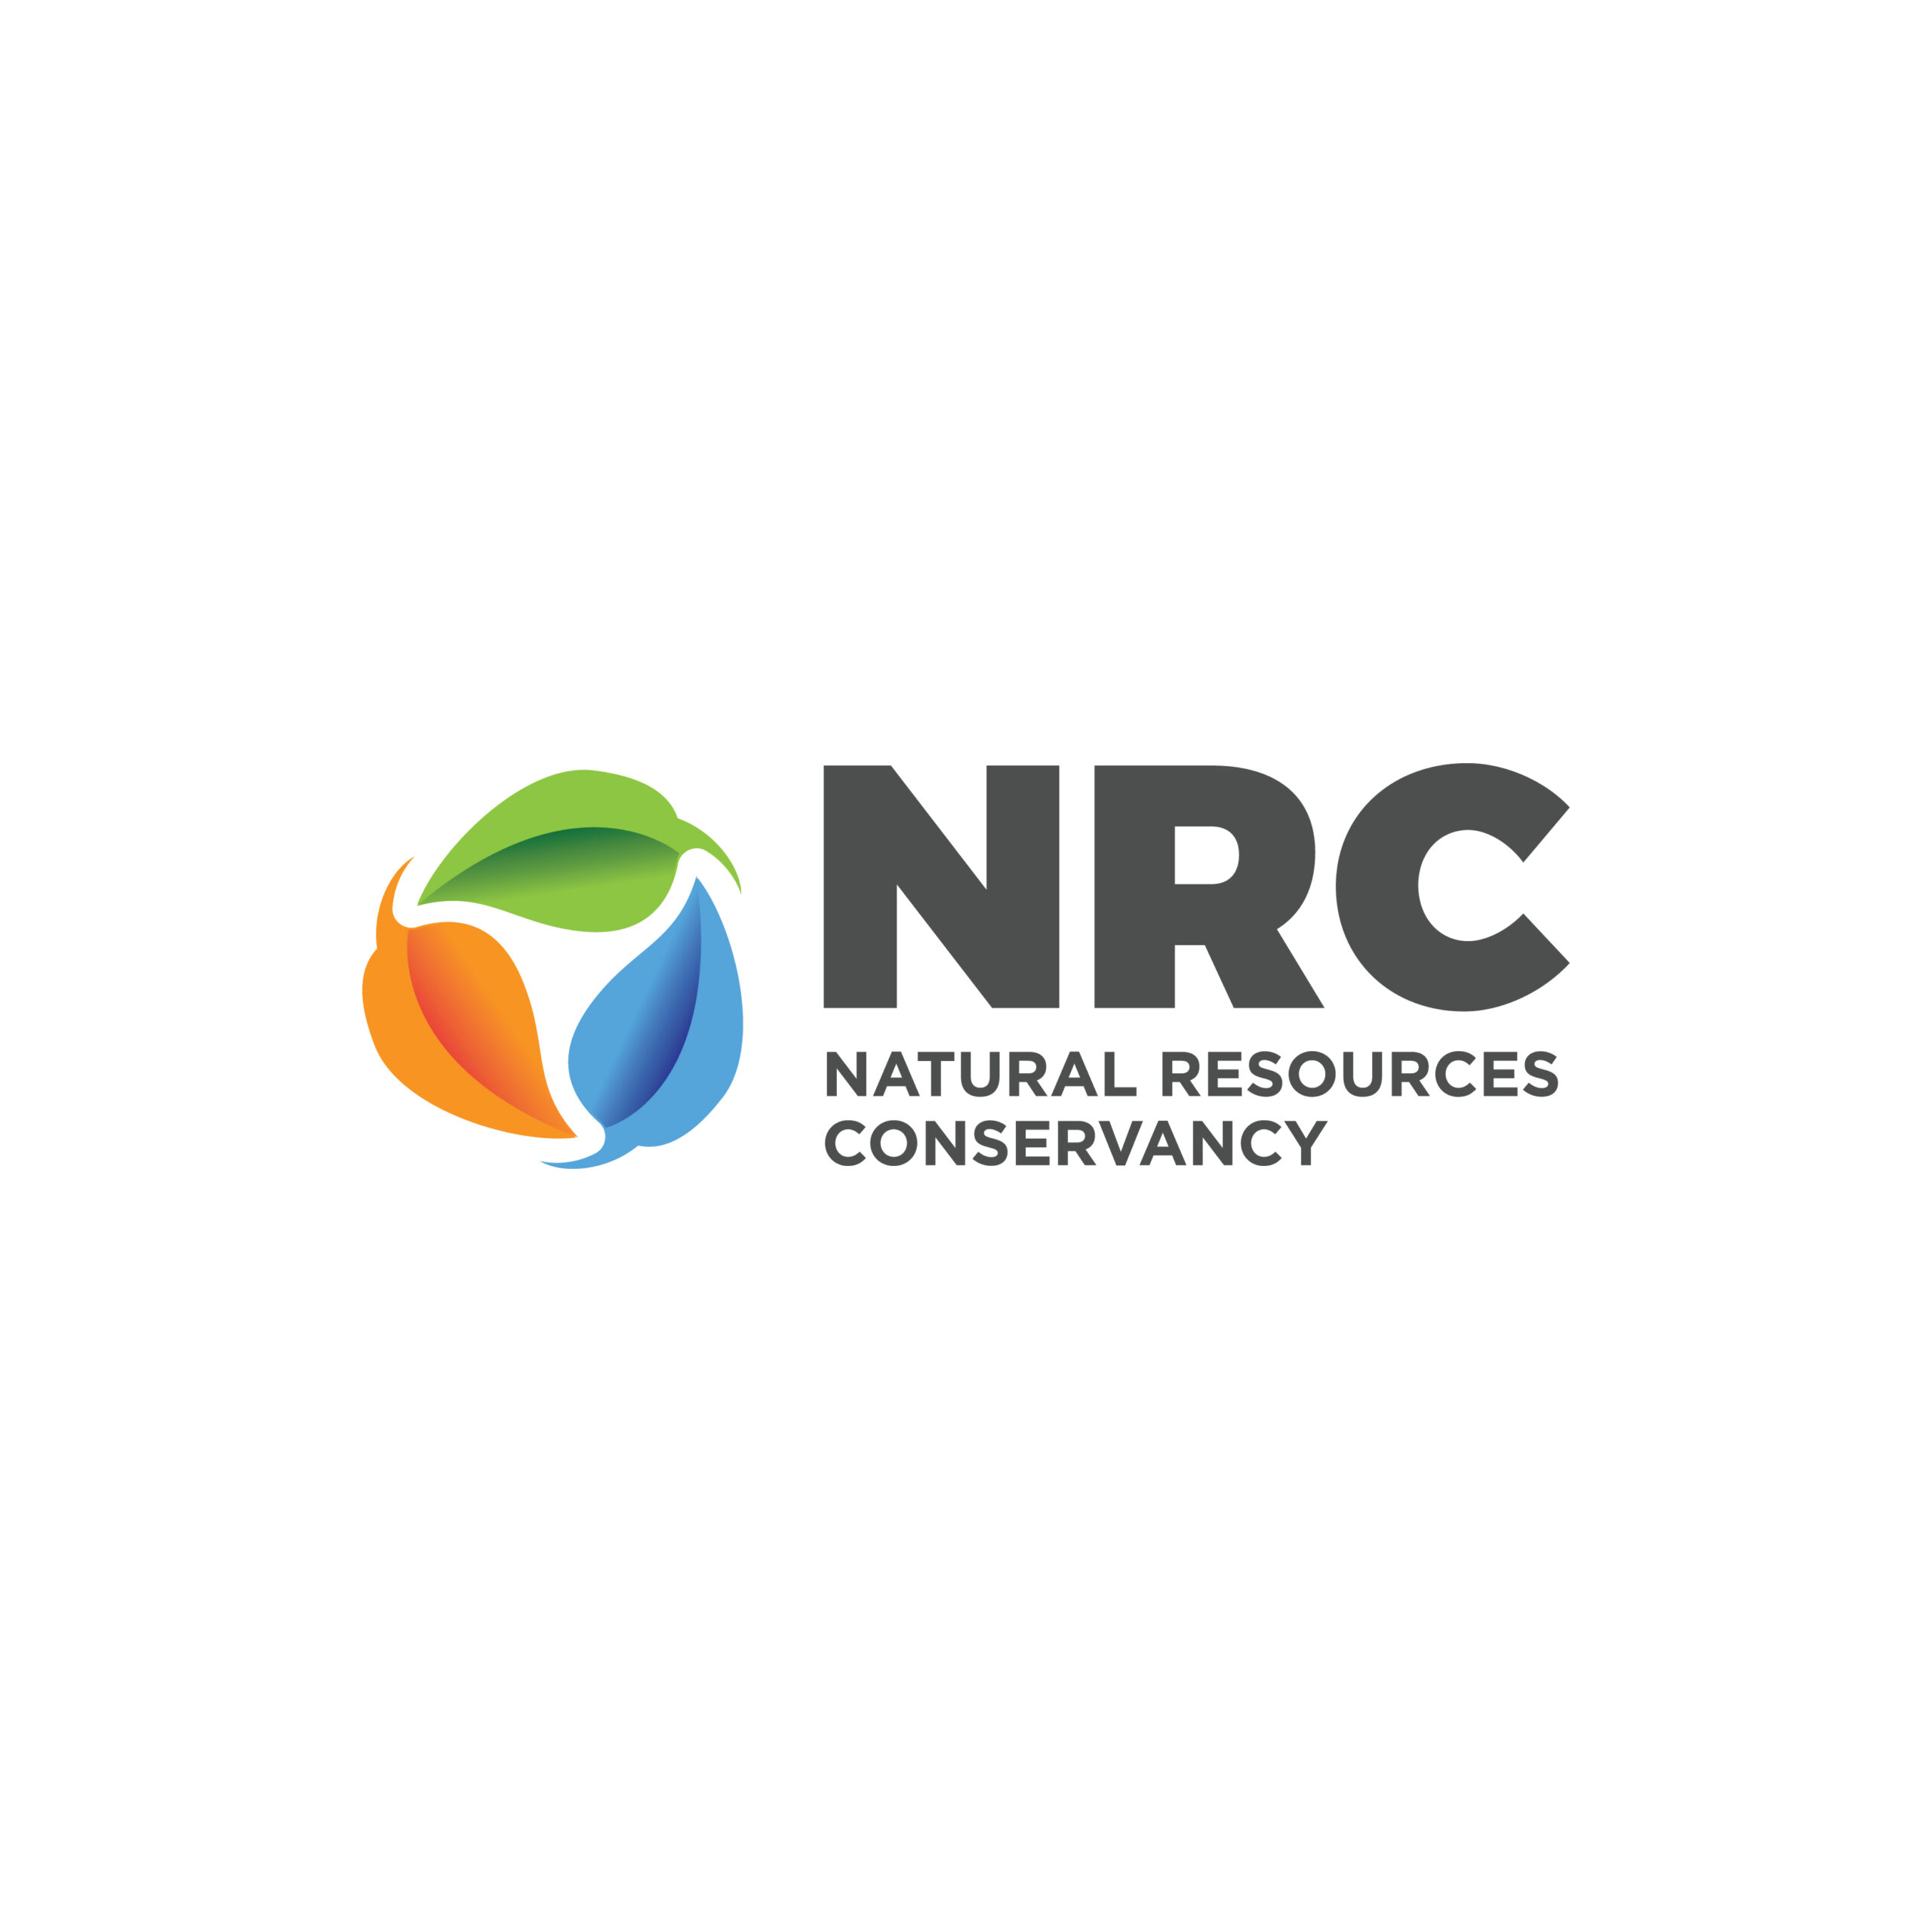 Natural Resources Conservancy